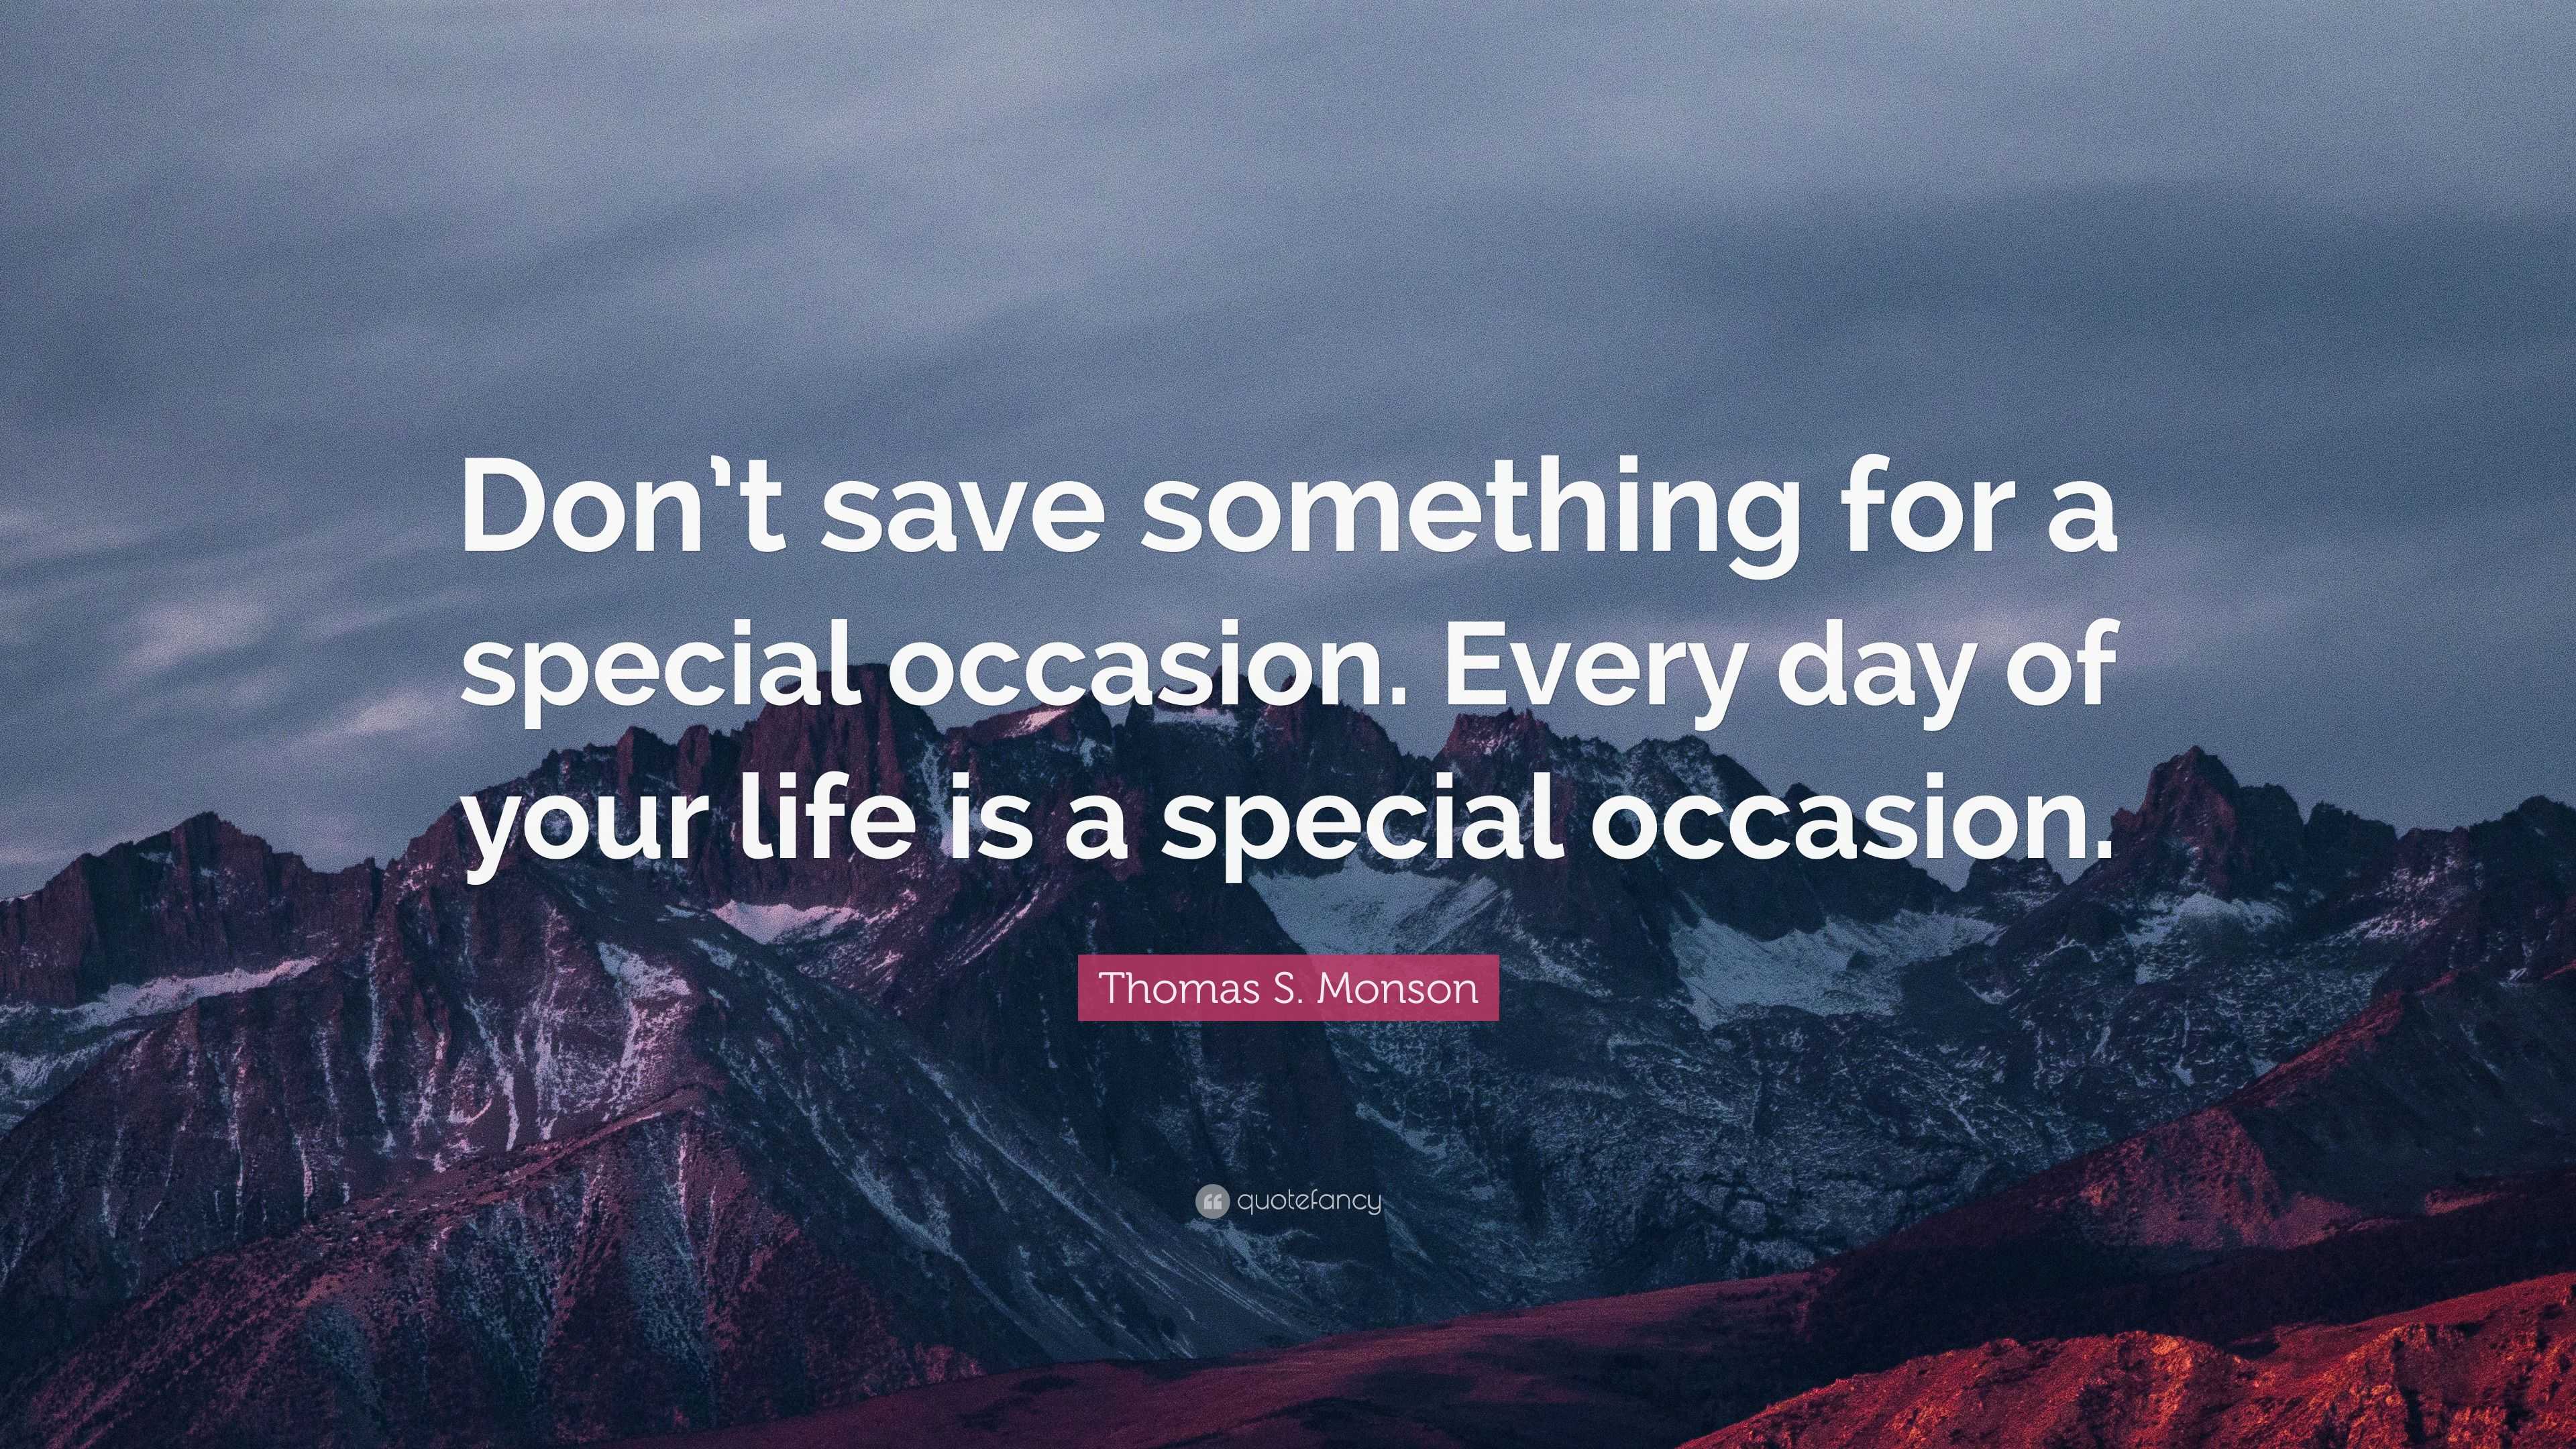 Thomas S. Monson Quote: “Don’t save something for a special occasion